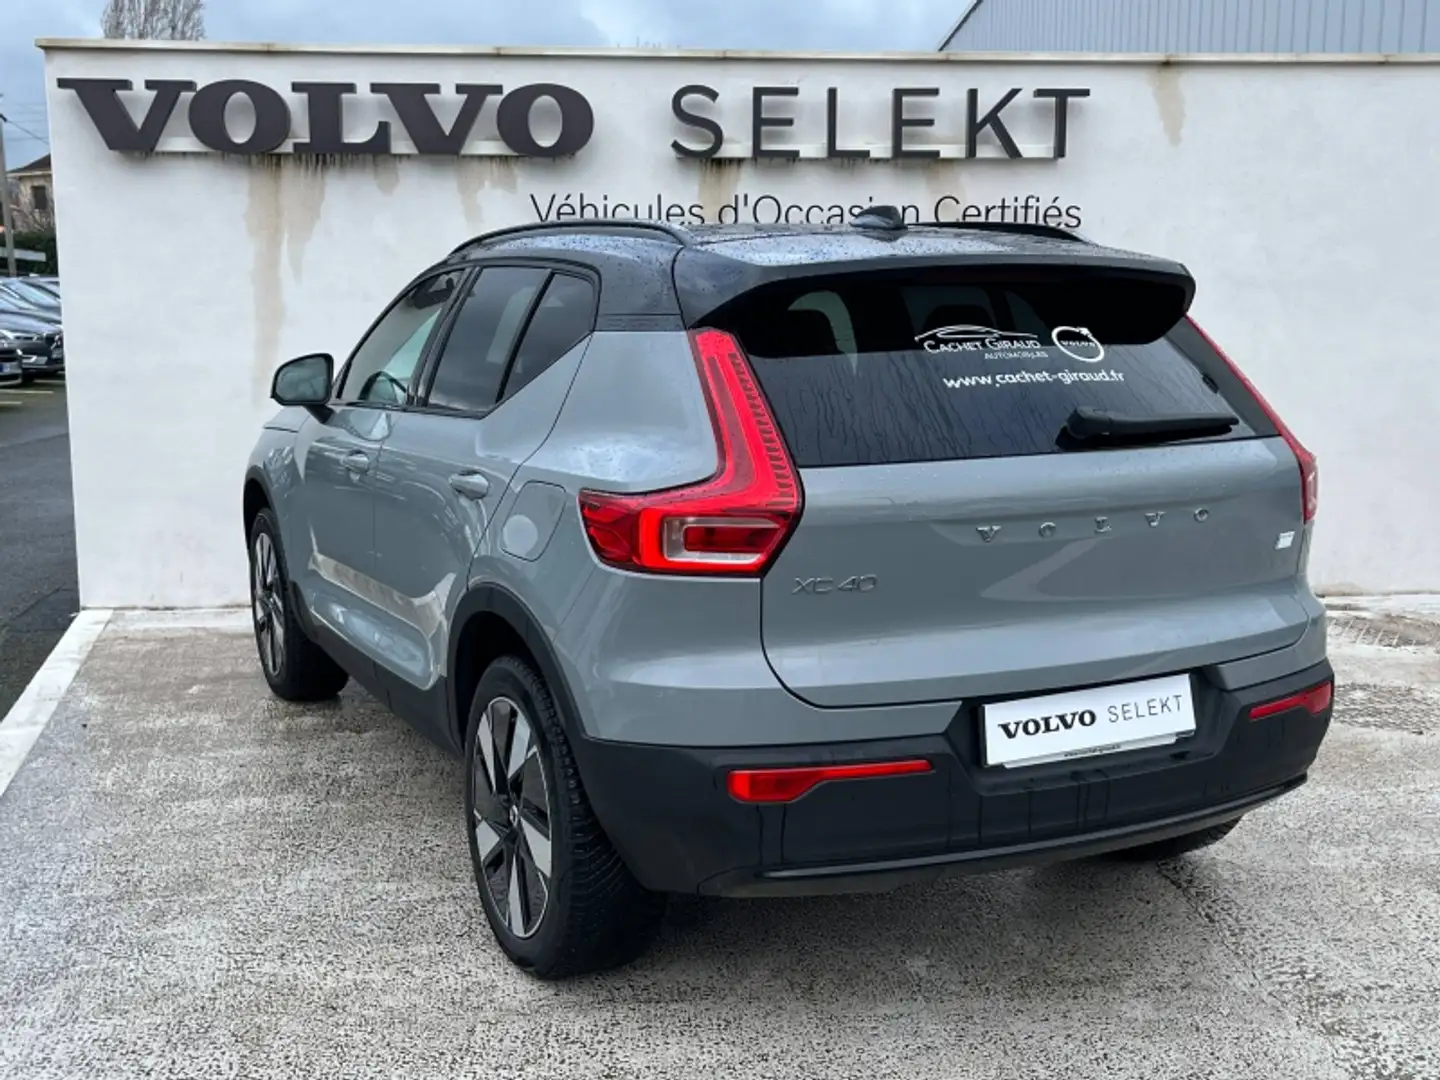 Volvo XC40 Recharge Extended Range 252ch Plus - 2